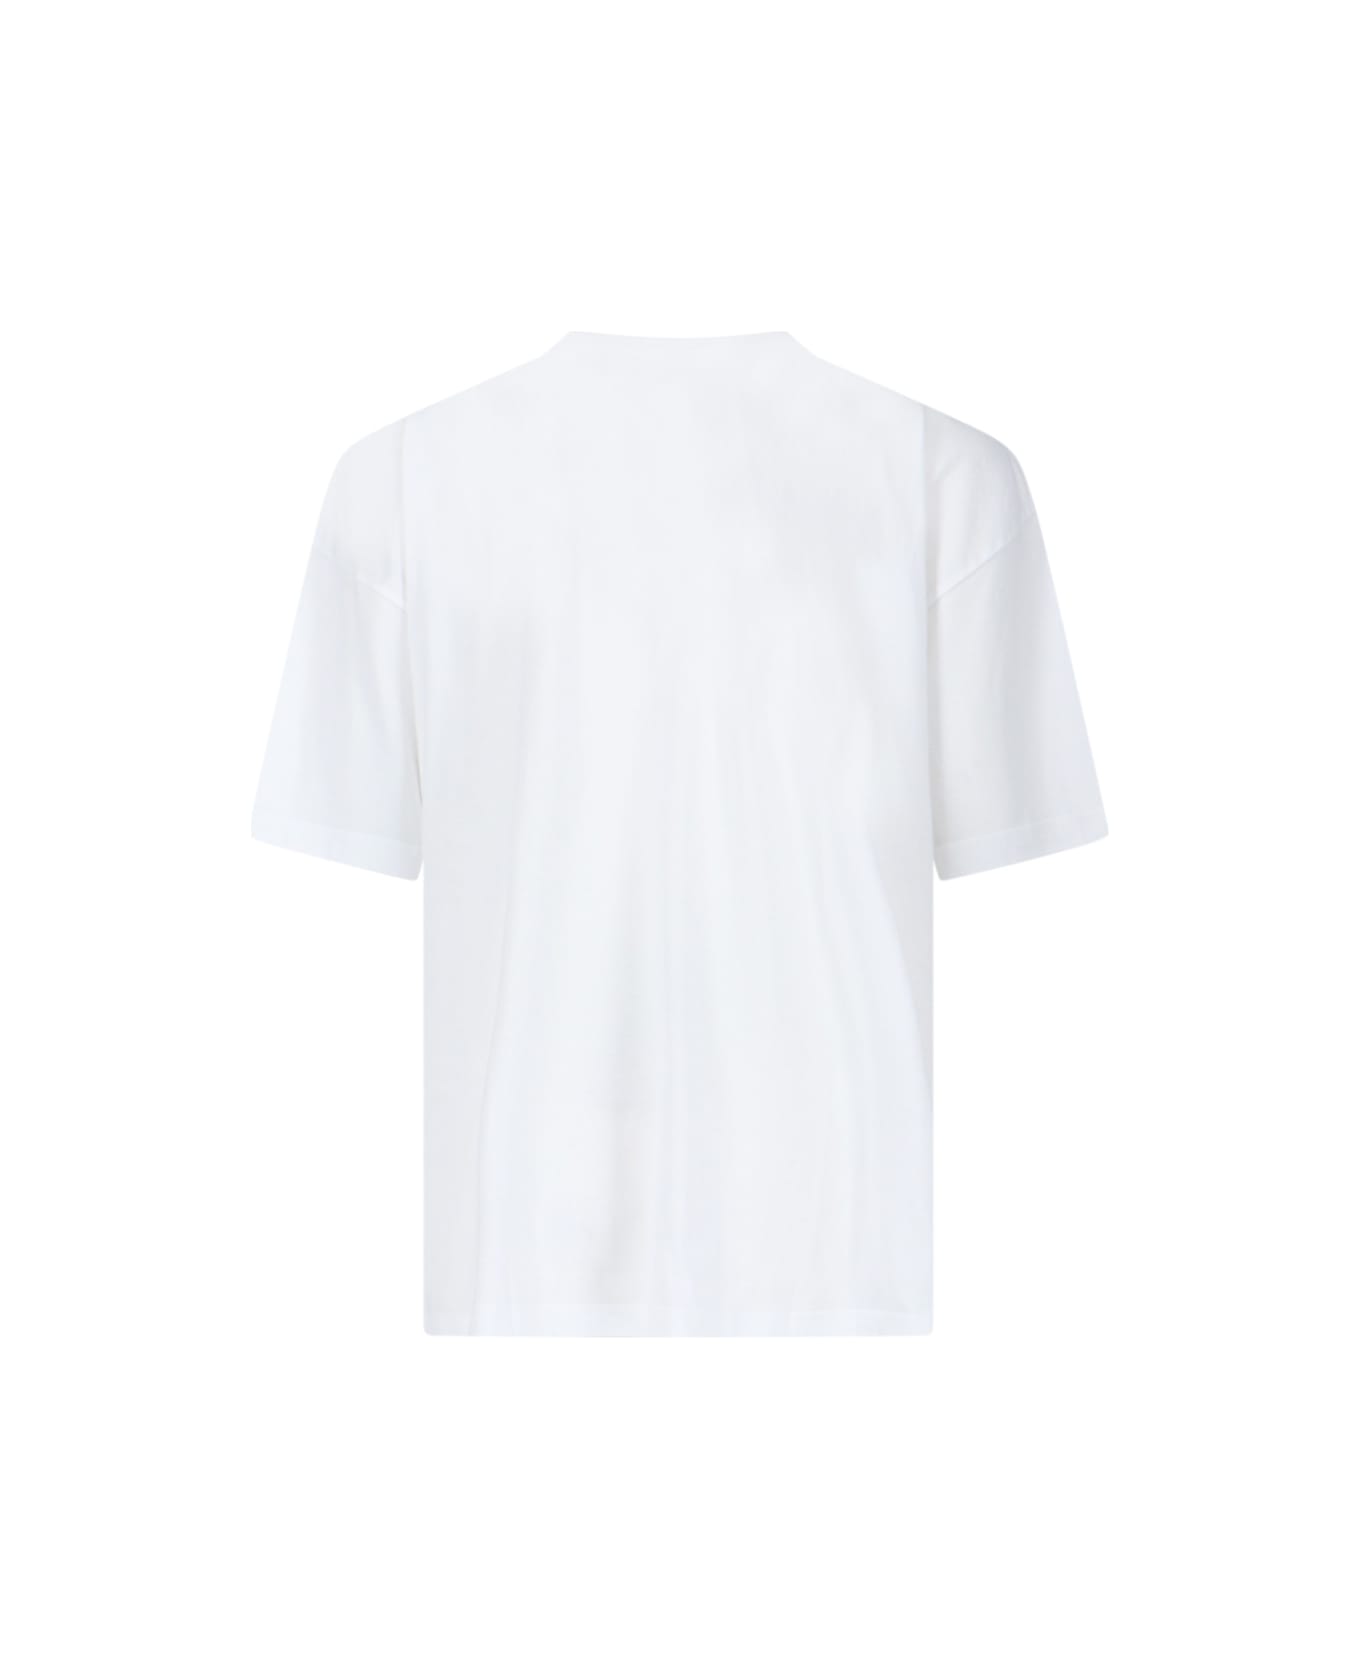 Y/Project Printed T-shirt - White